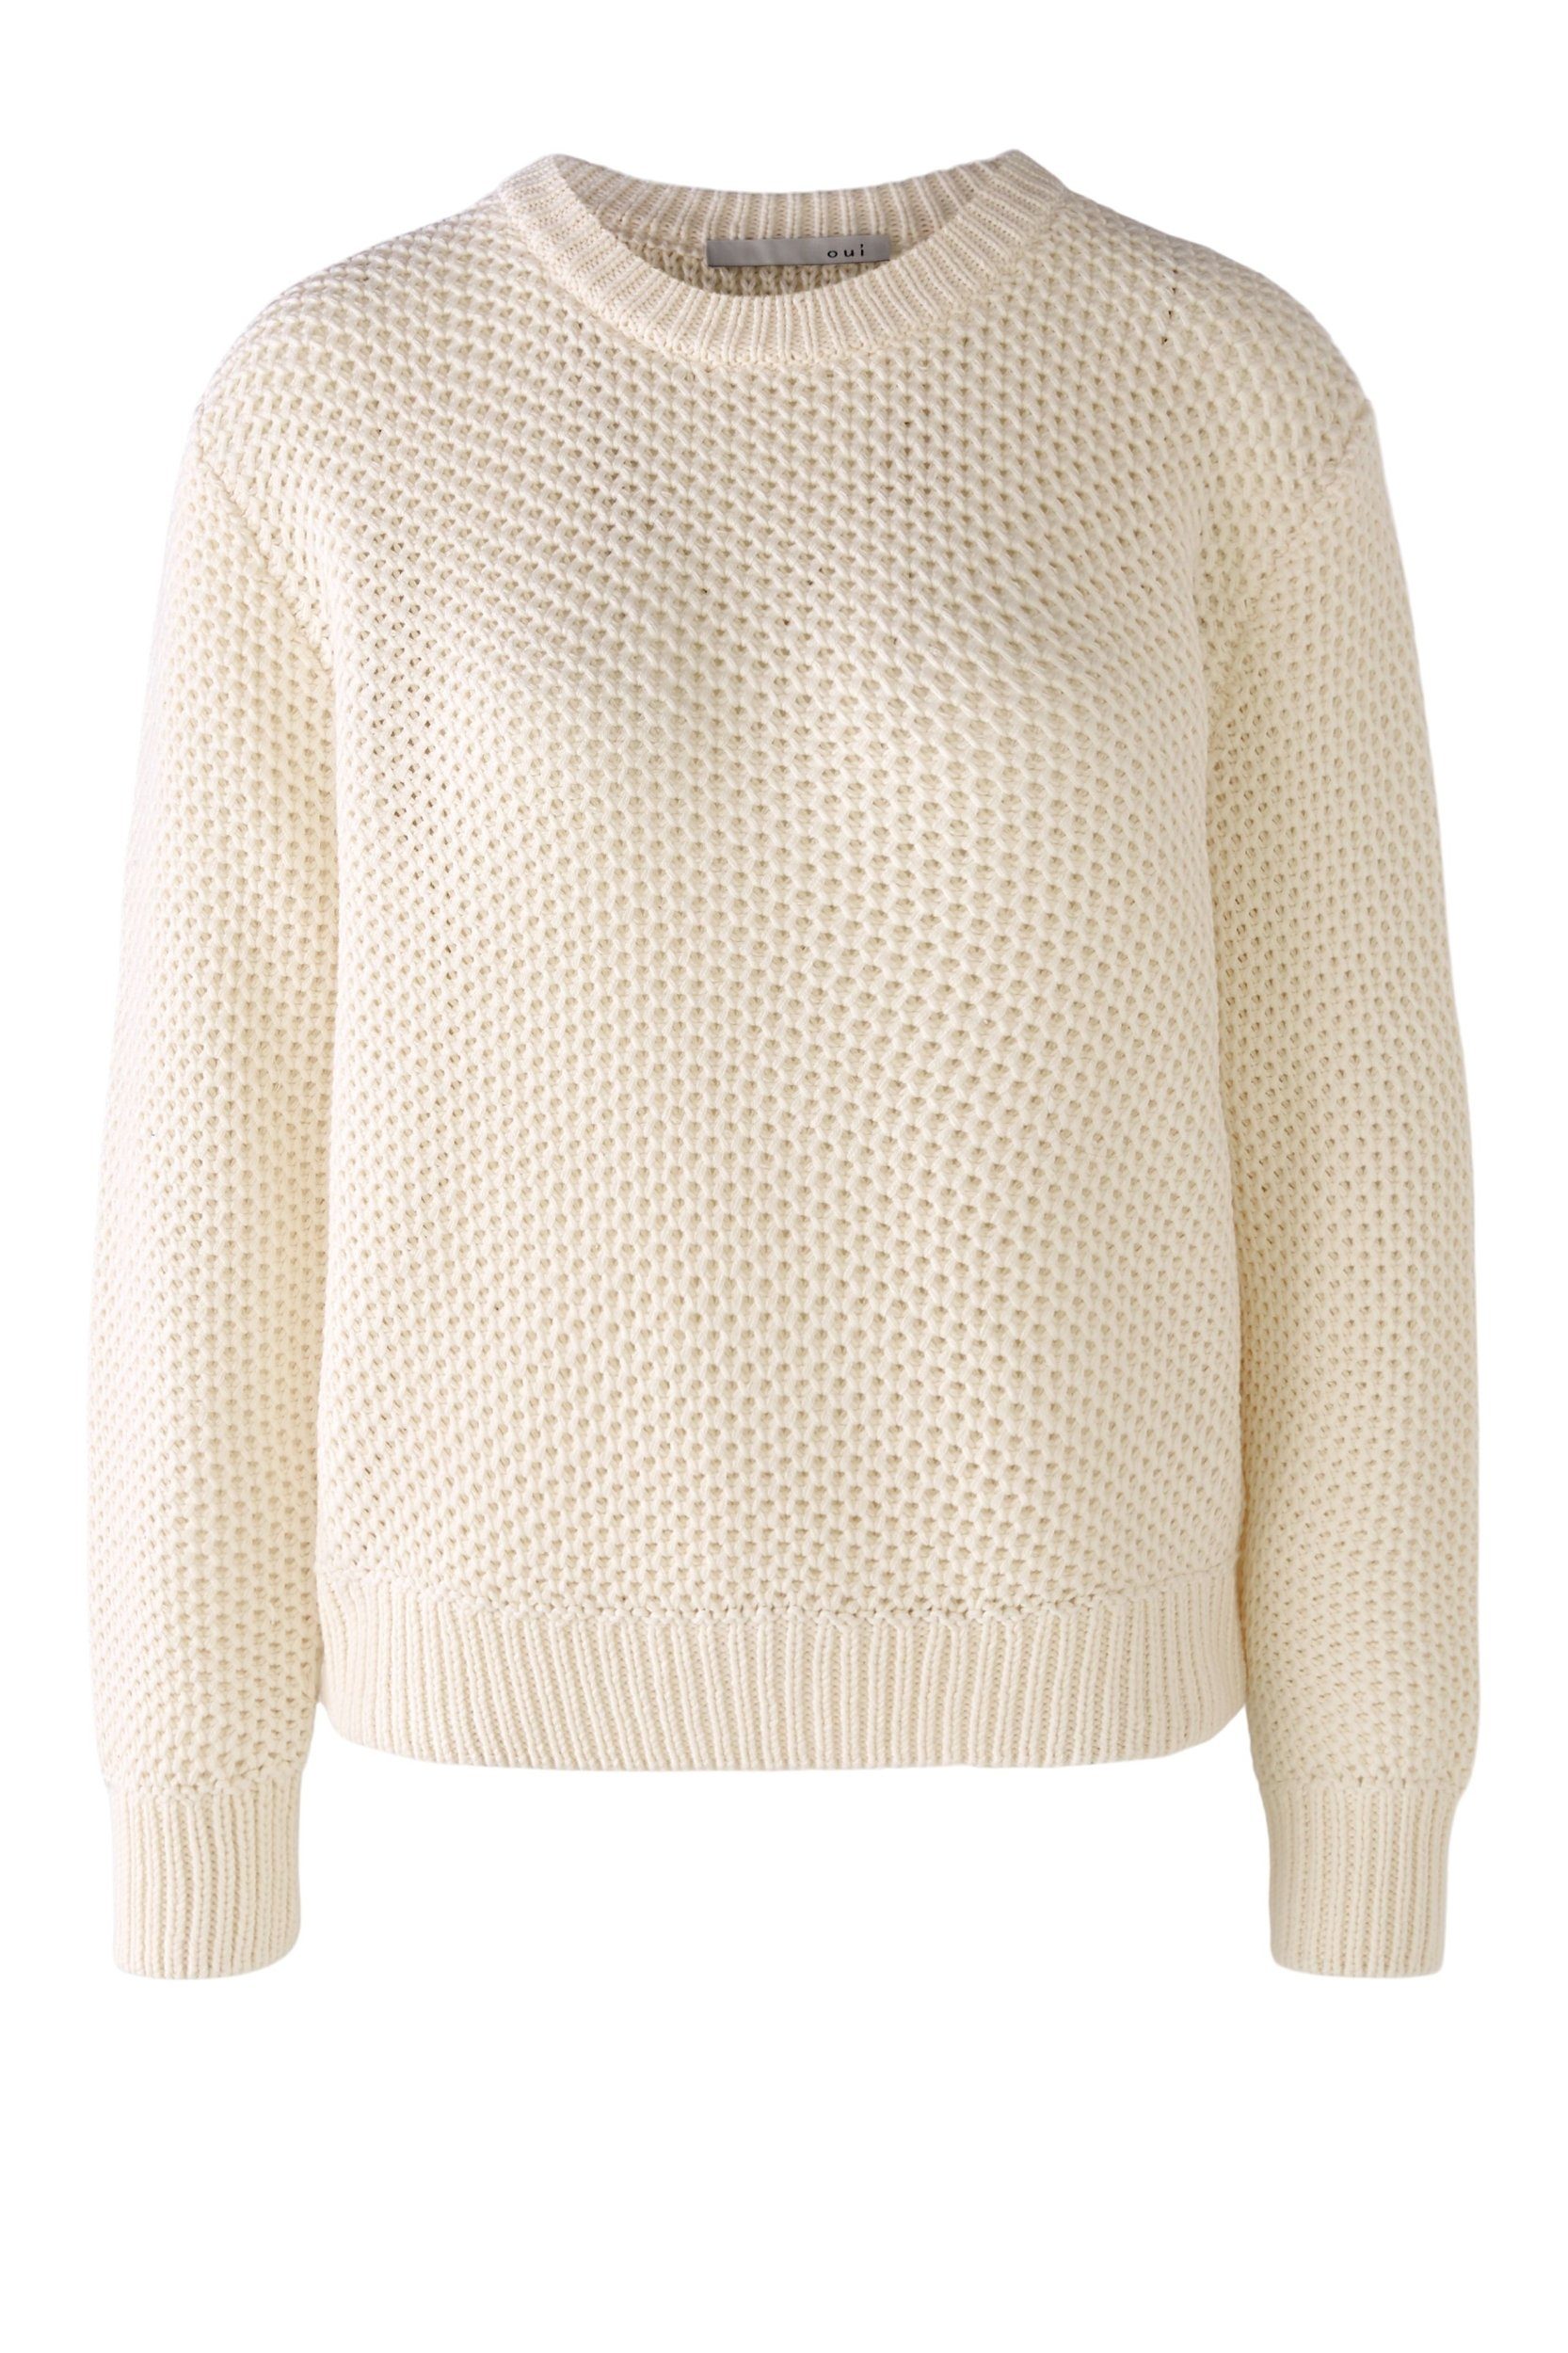 Oui Wollpullover online | OTTO